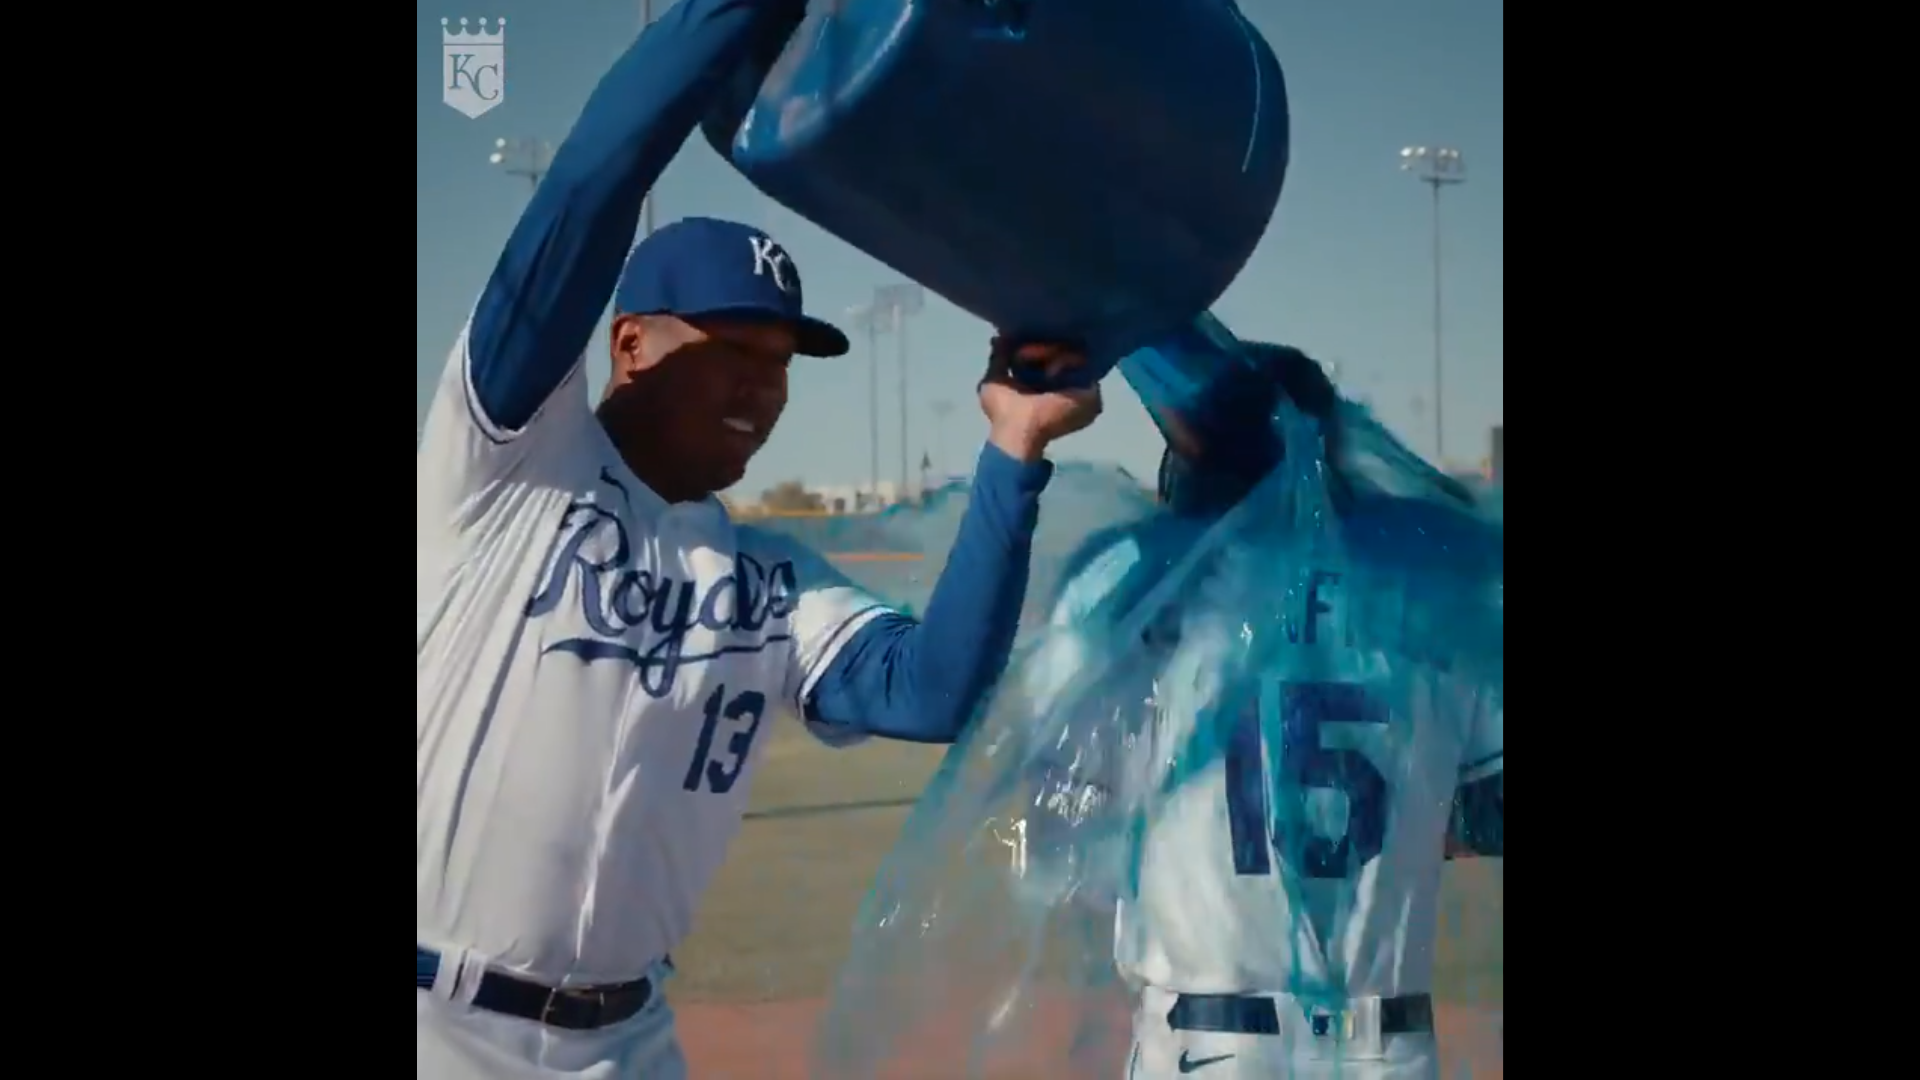 Kansas City Royals Hoping City Will Paint It Blue To Celebrate Opening Day 4state News Mo Ar Ks Ok